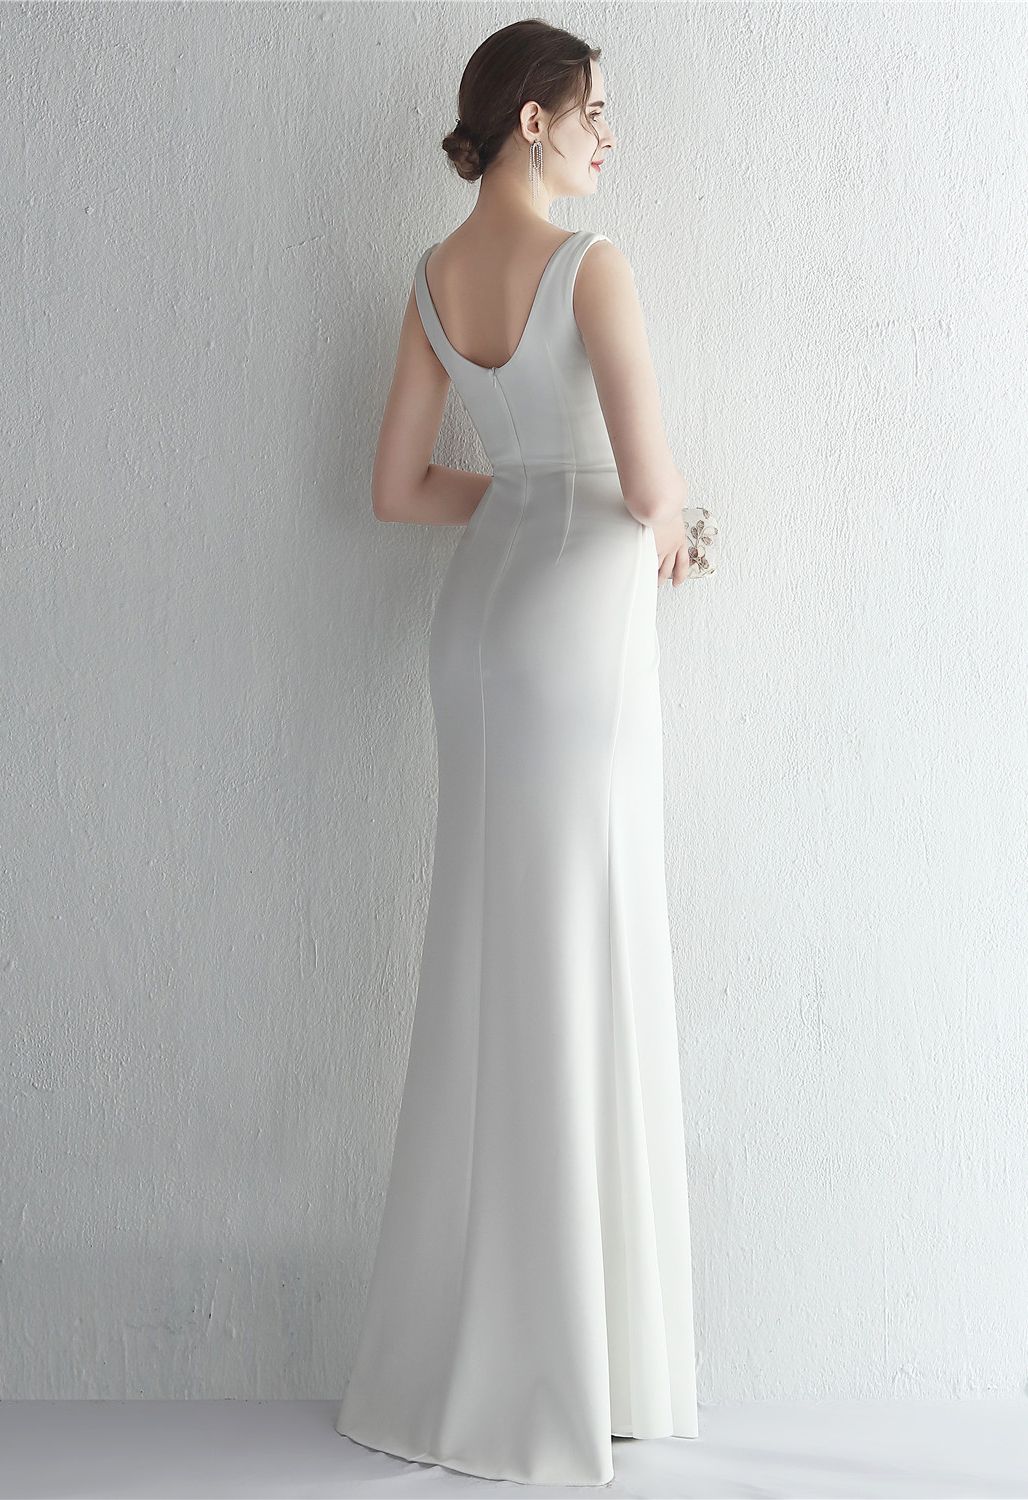 Ruched Waist High Slit Gown in White